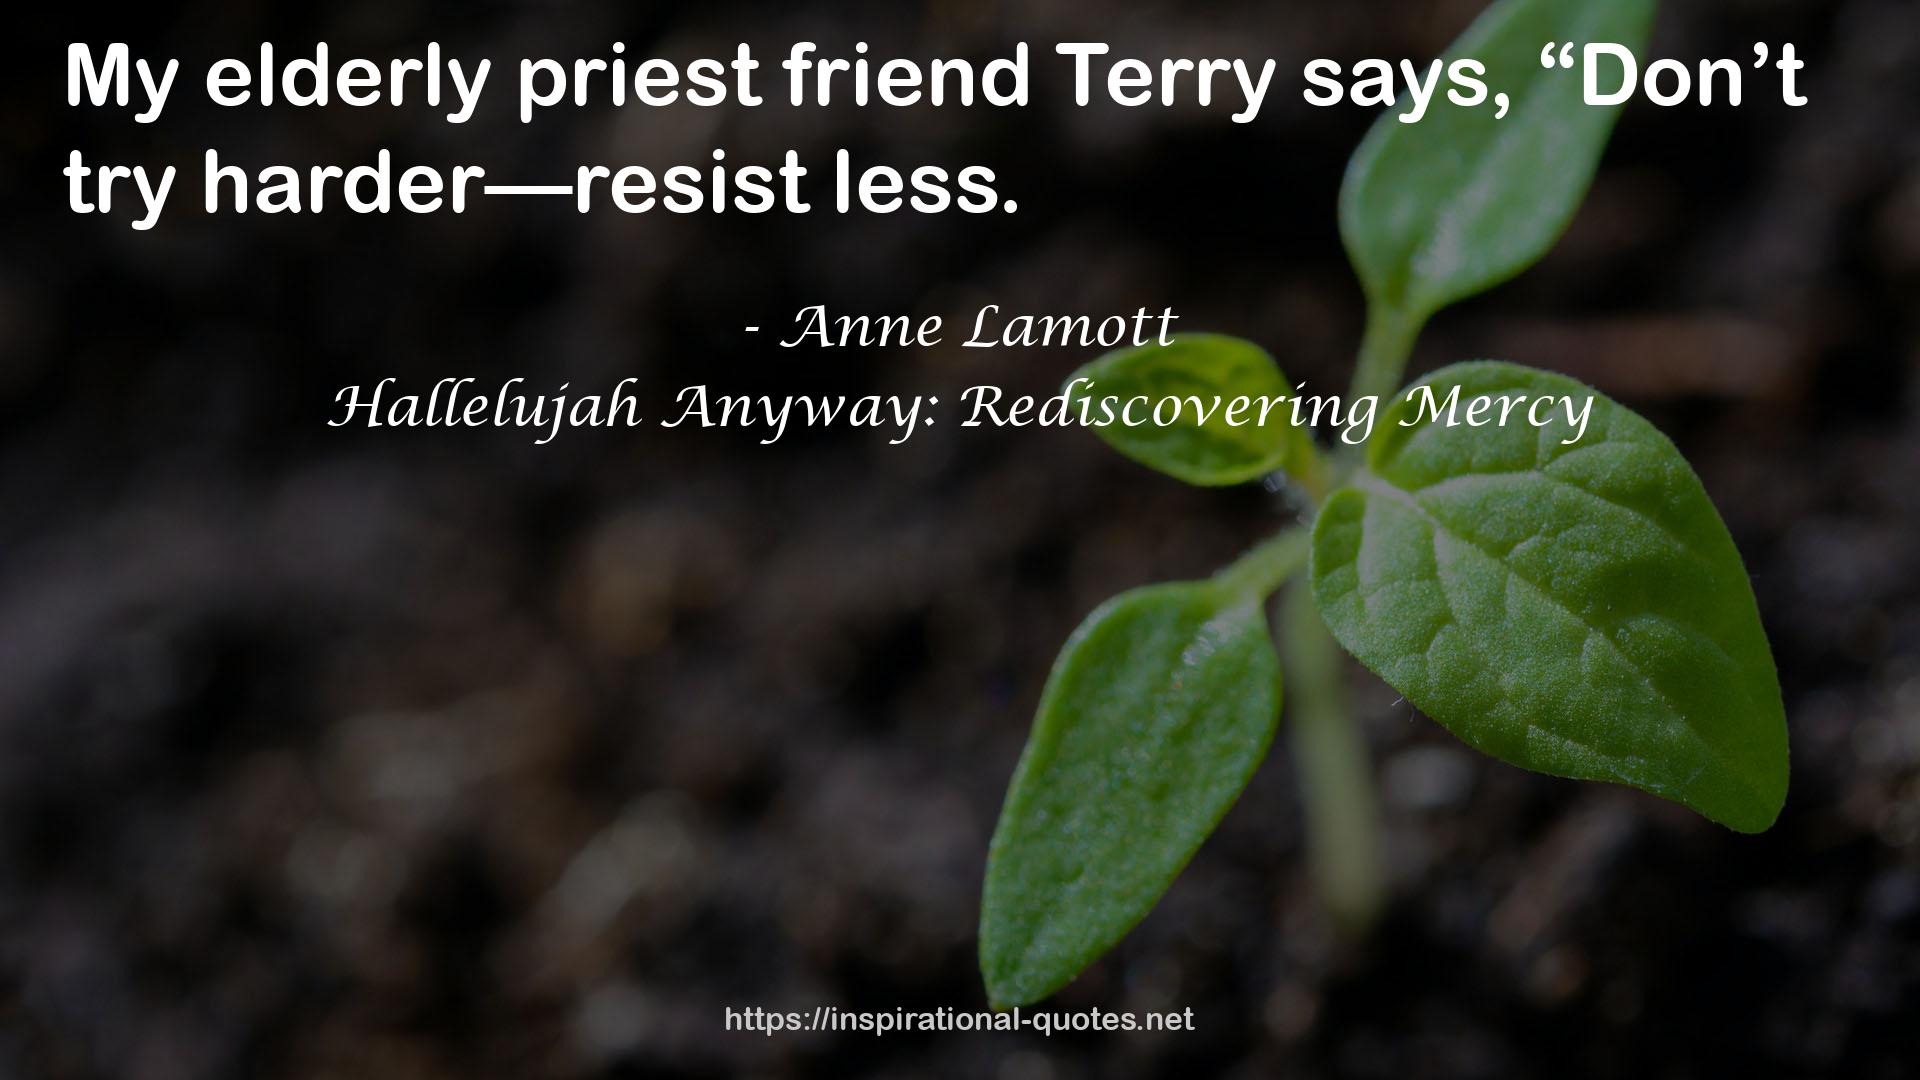 Hallelujah Anyway: Rediscovering Mercy QUOTES